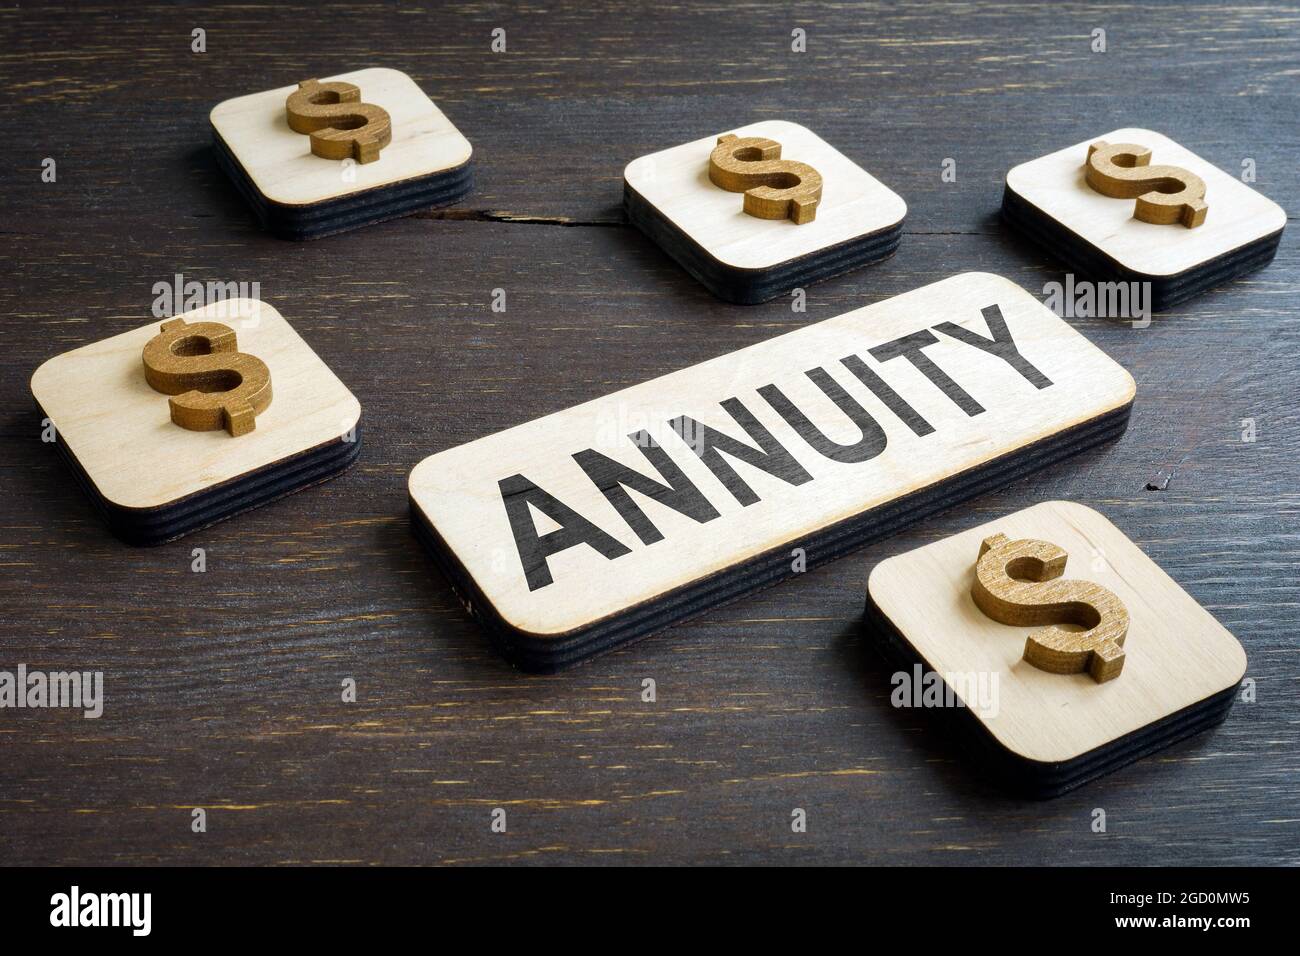 Annuity word and dollar signs. Stock Photo